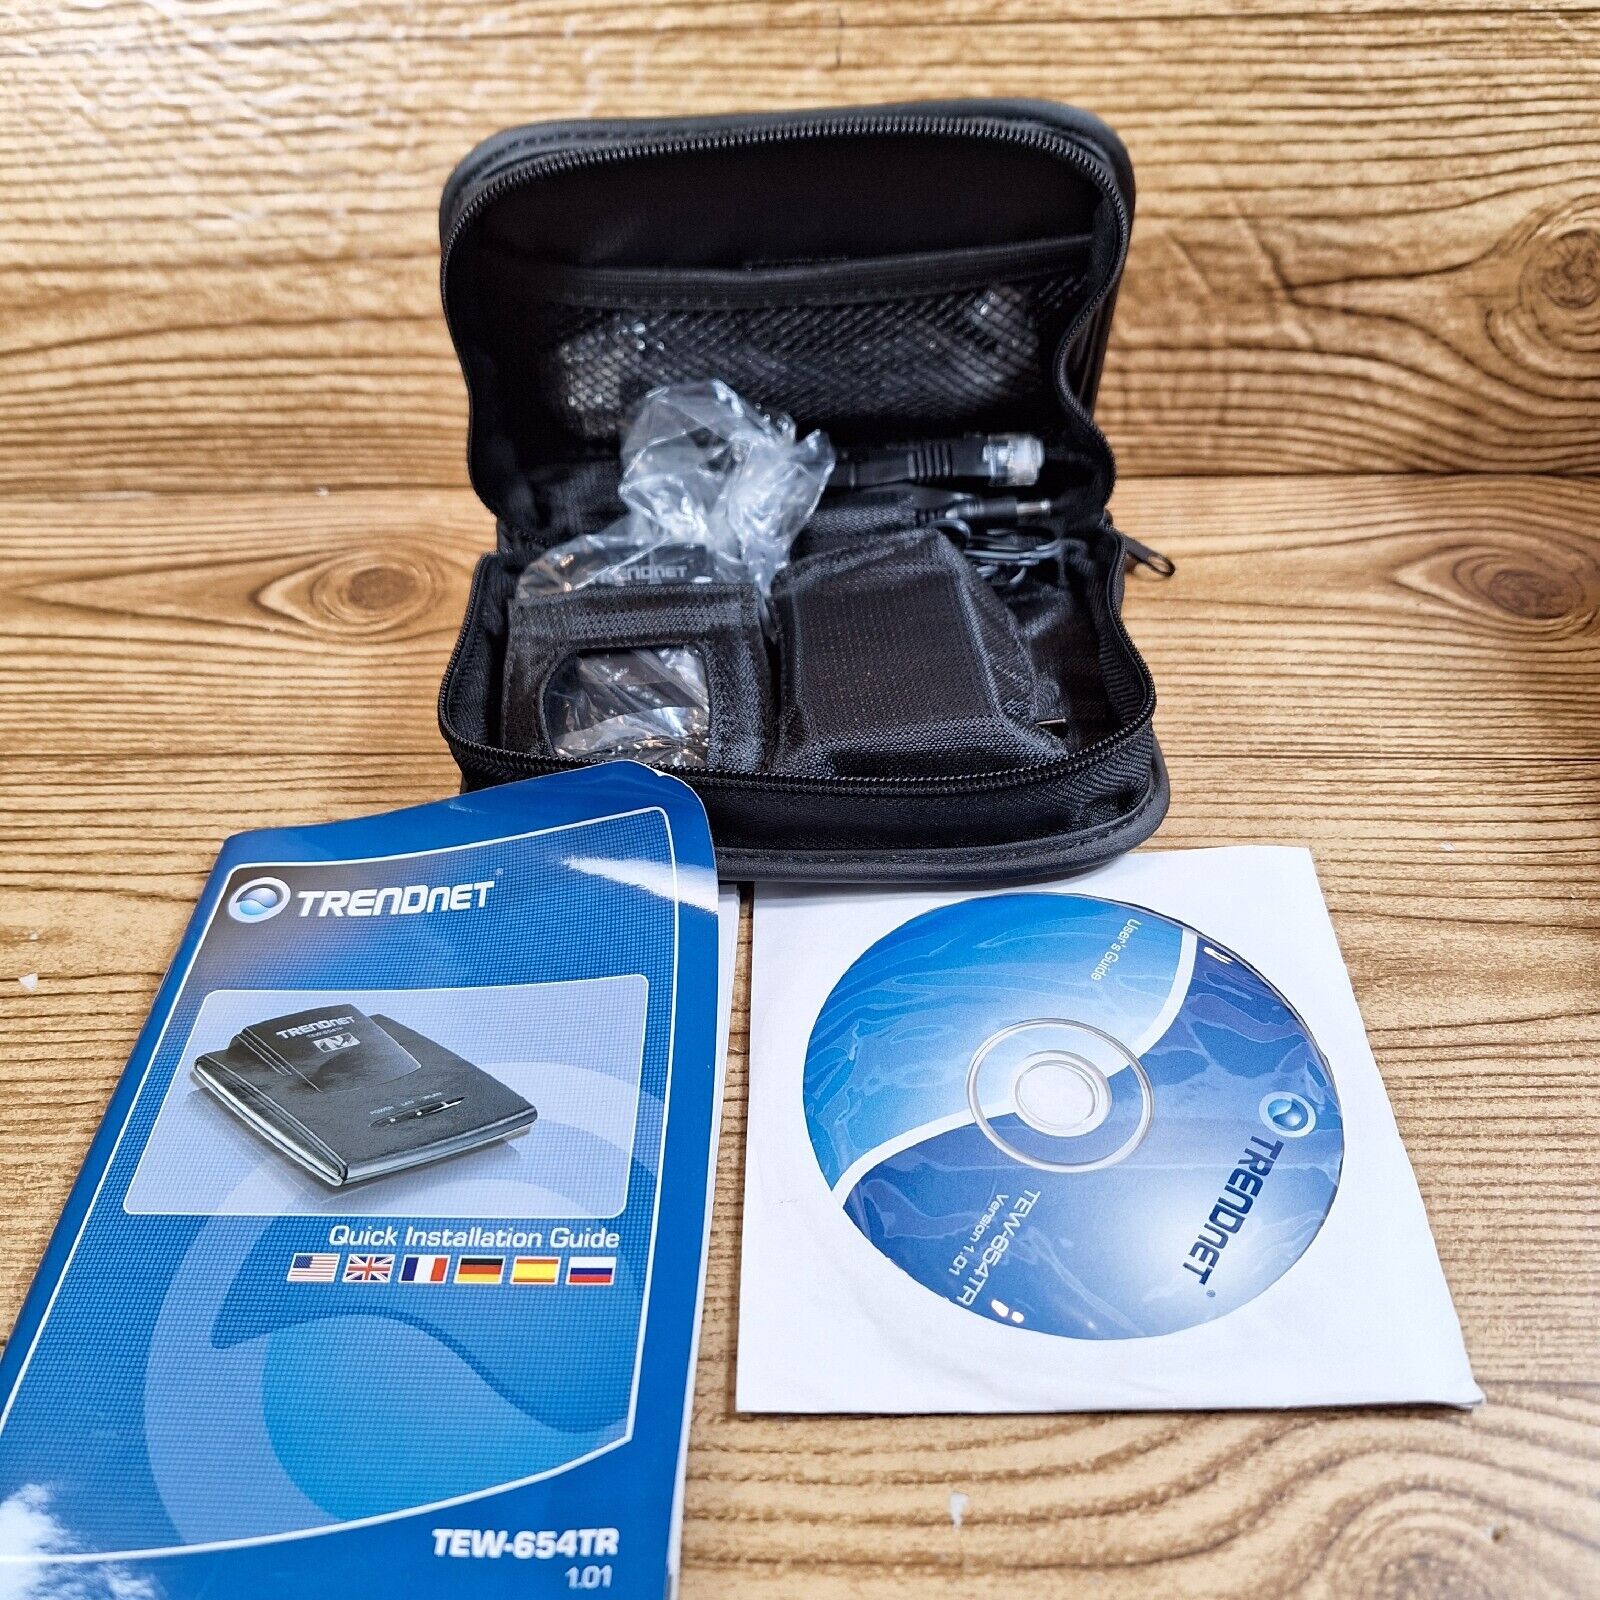 Trendnet Travel Router TEW-654TR-1 In Carrying Case With Manual 